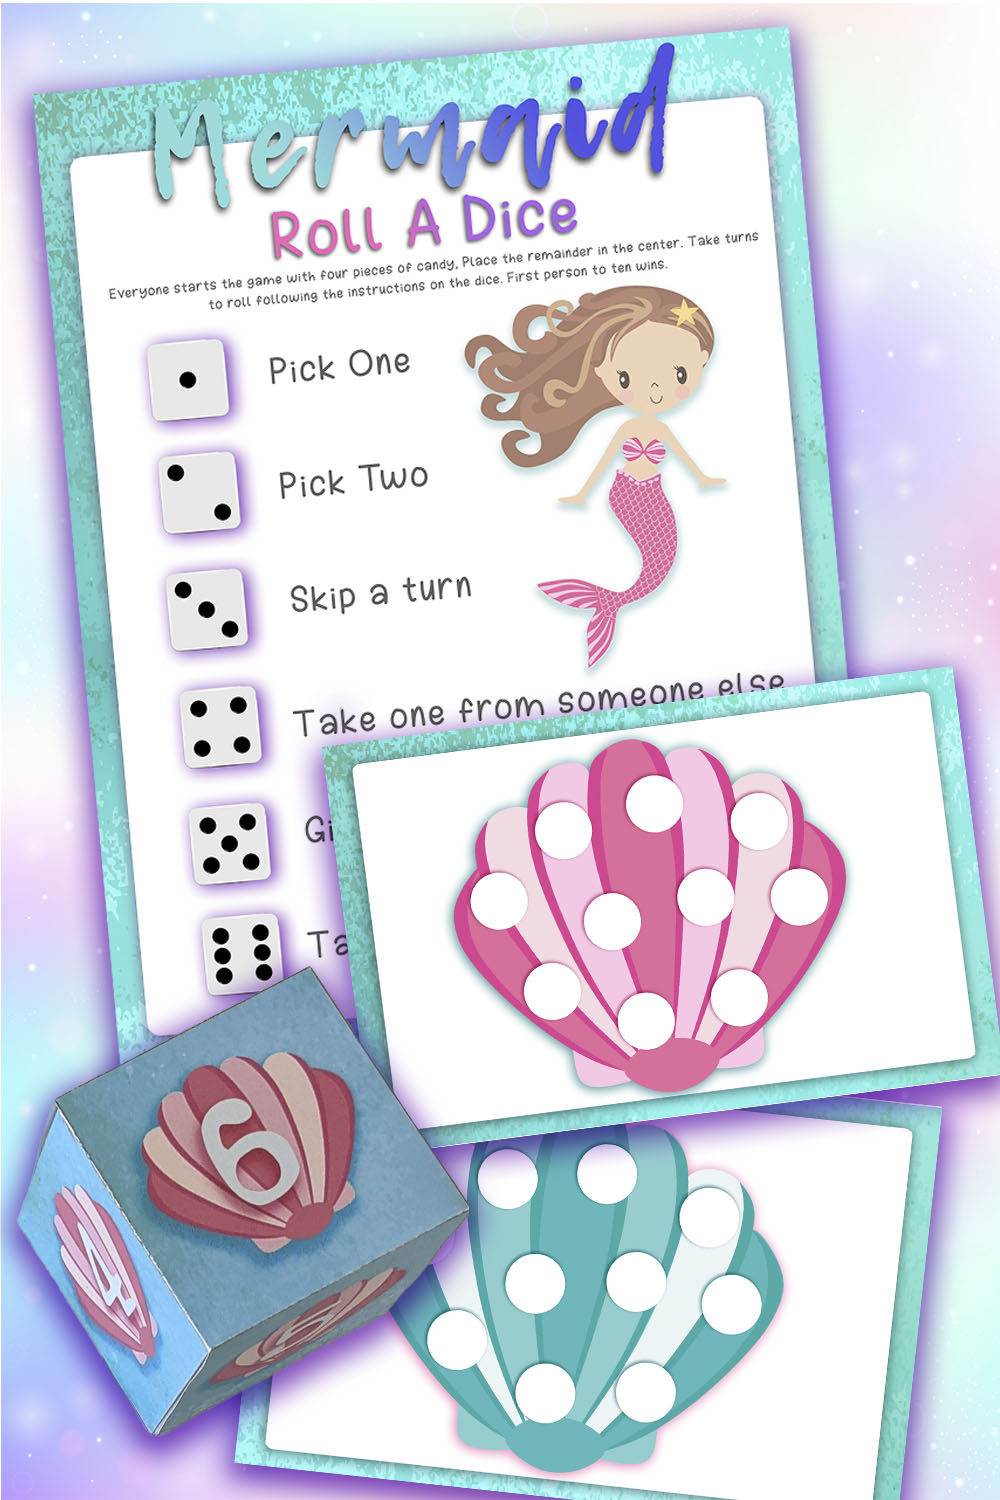 Roll-a-dice-mermaid-party-game